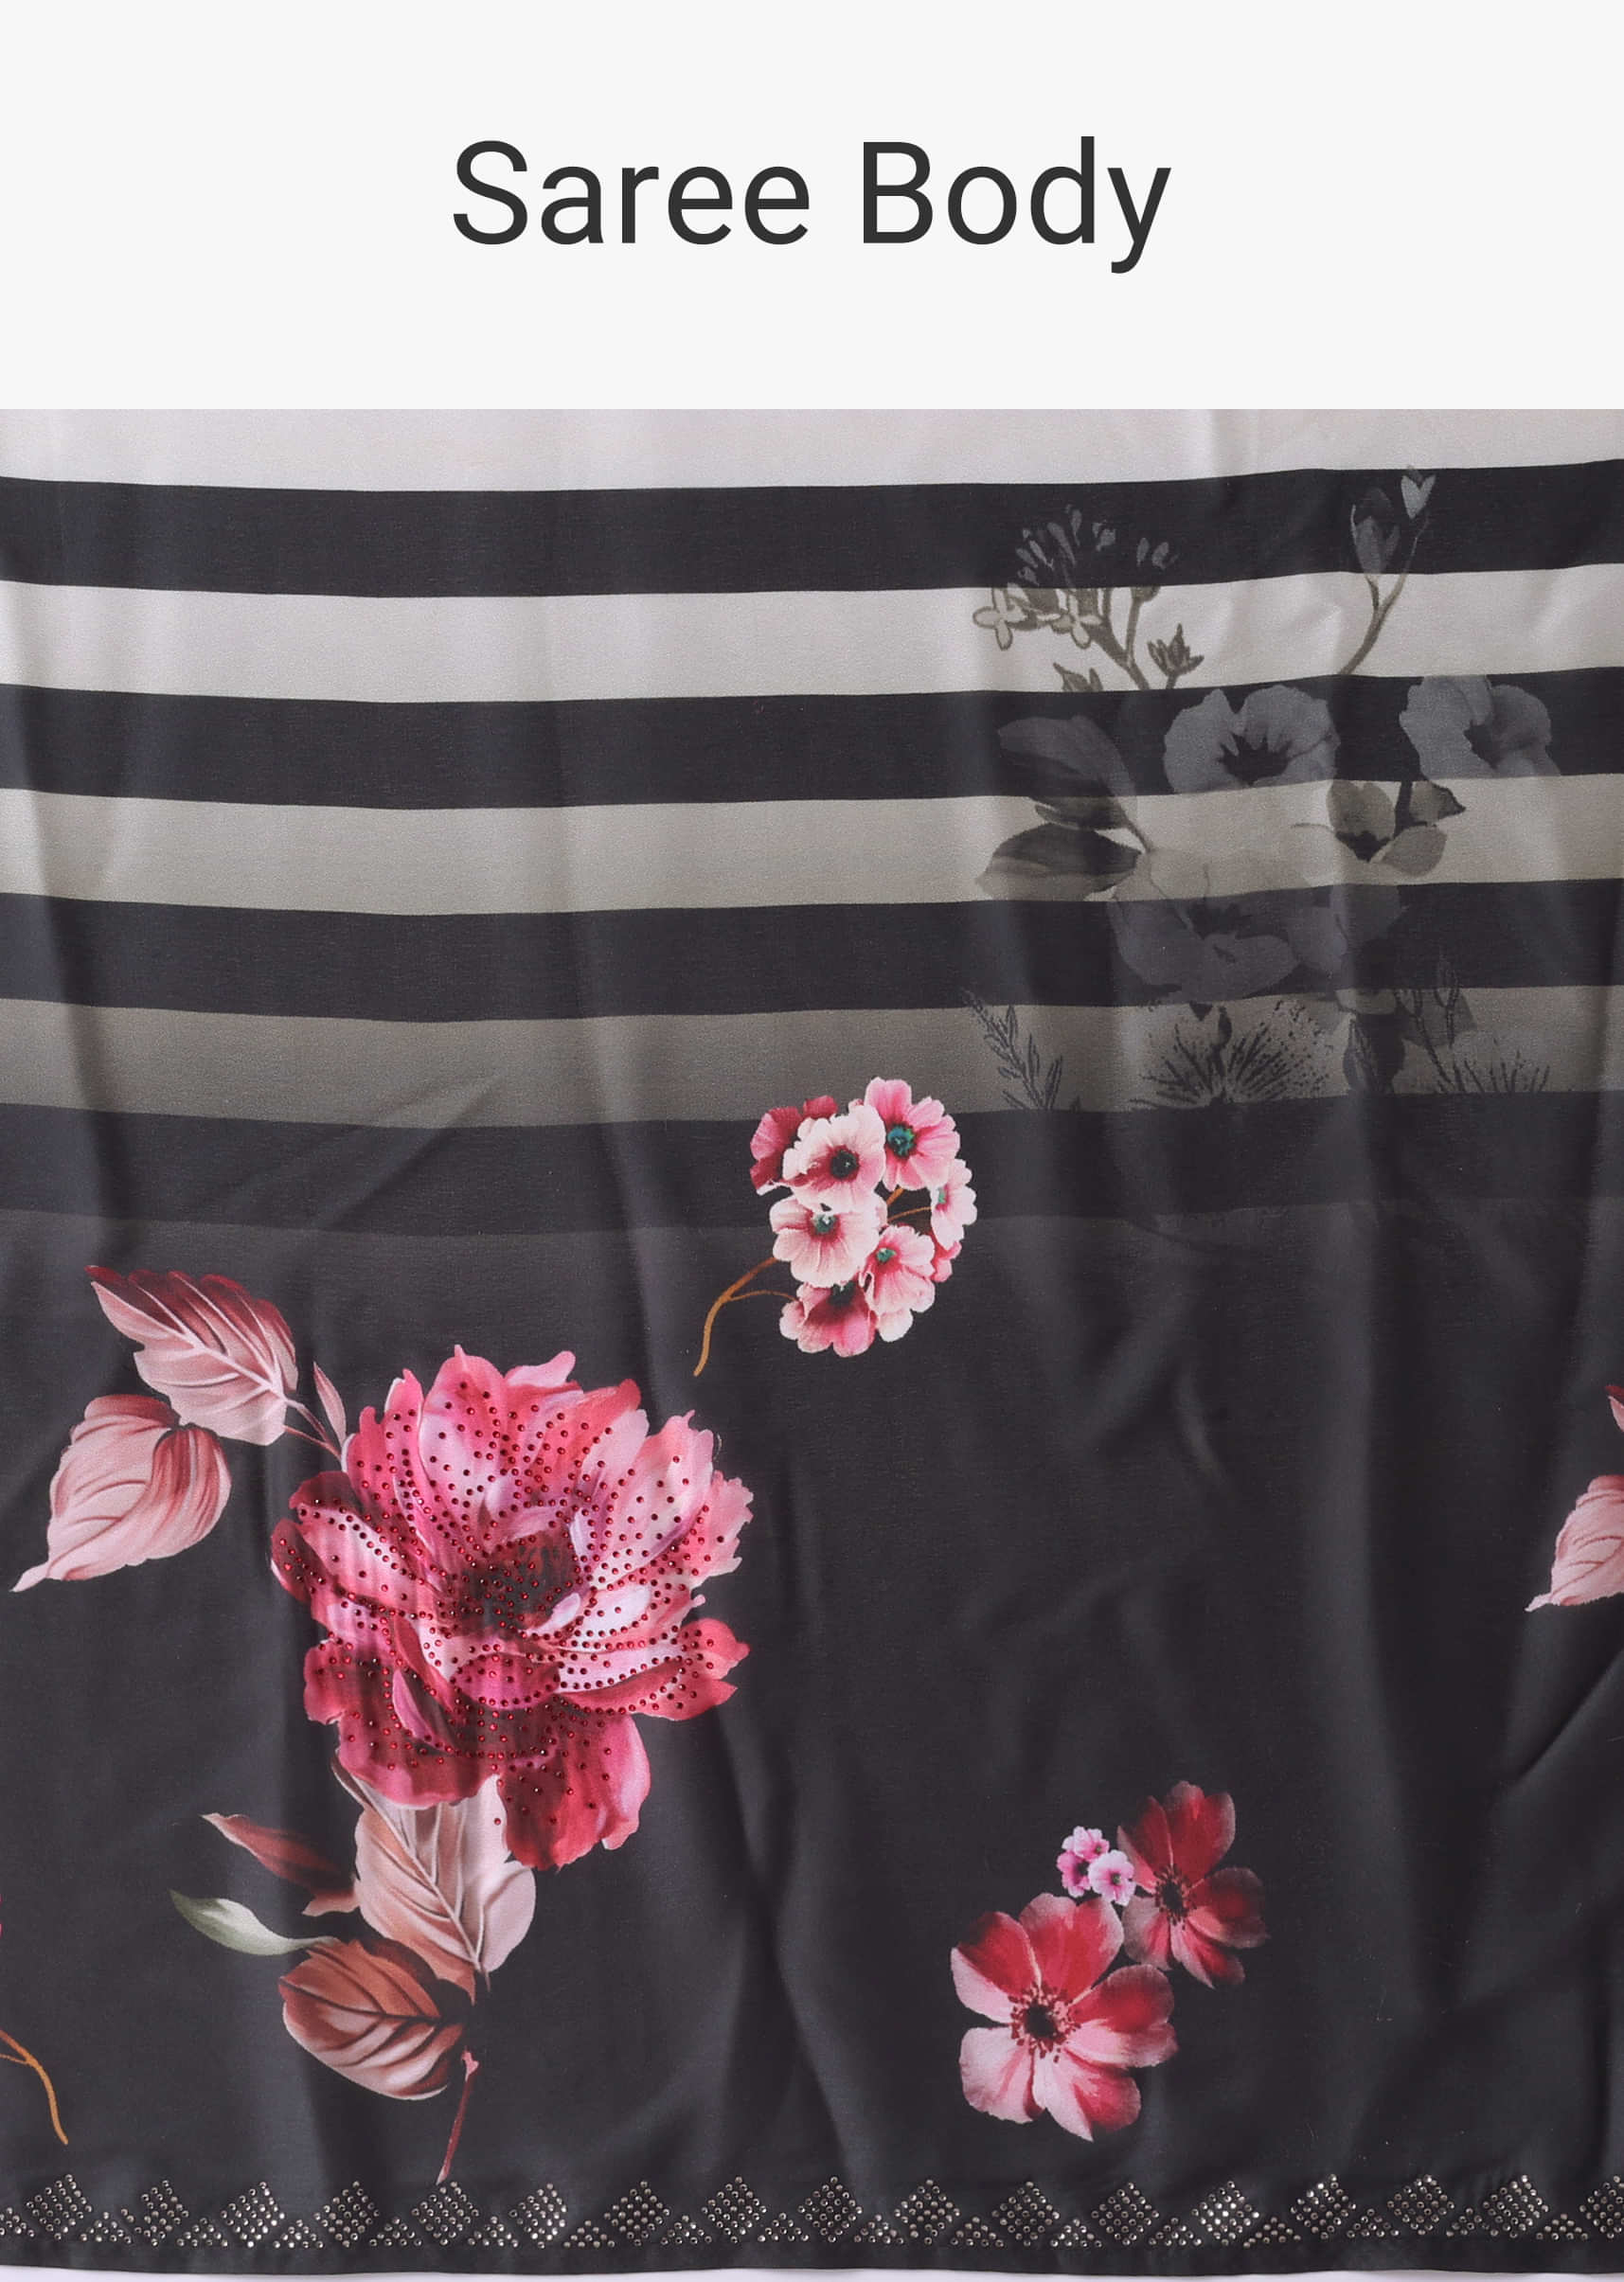 Pirate Black Floral Printed Saree With White Stripes In Satin